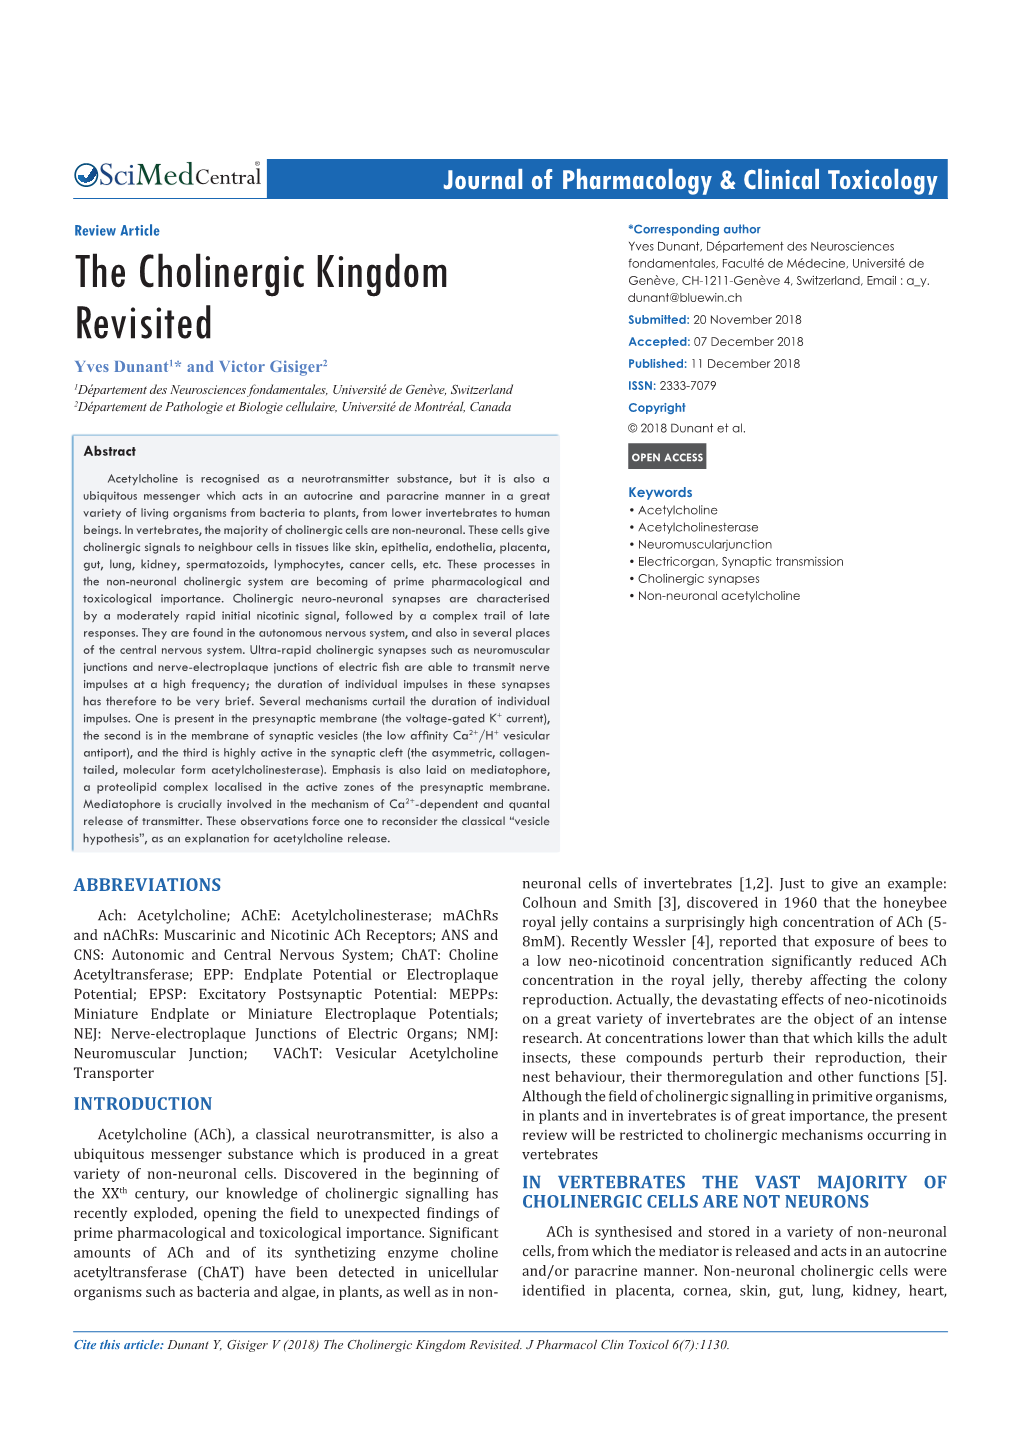 The Cholinergic Kingdom Revisited